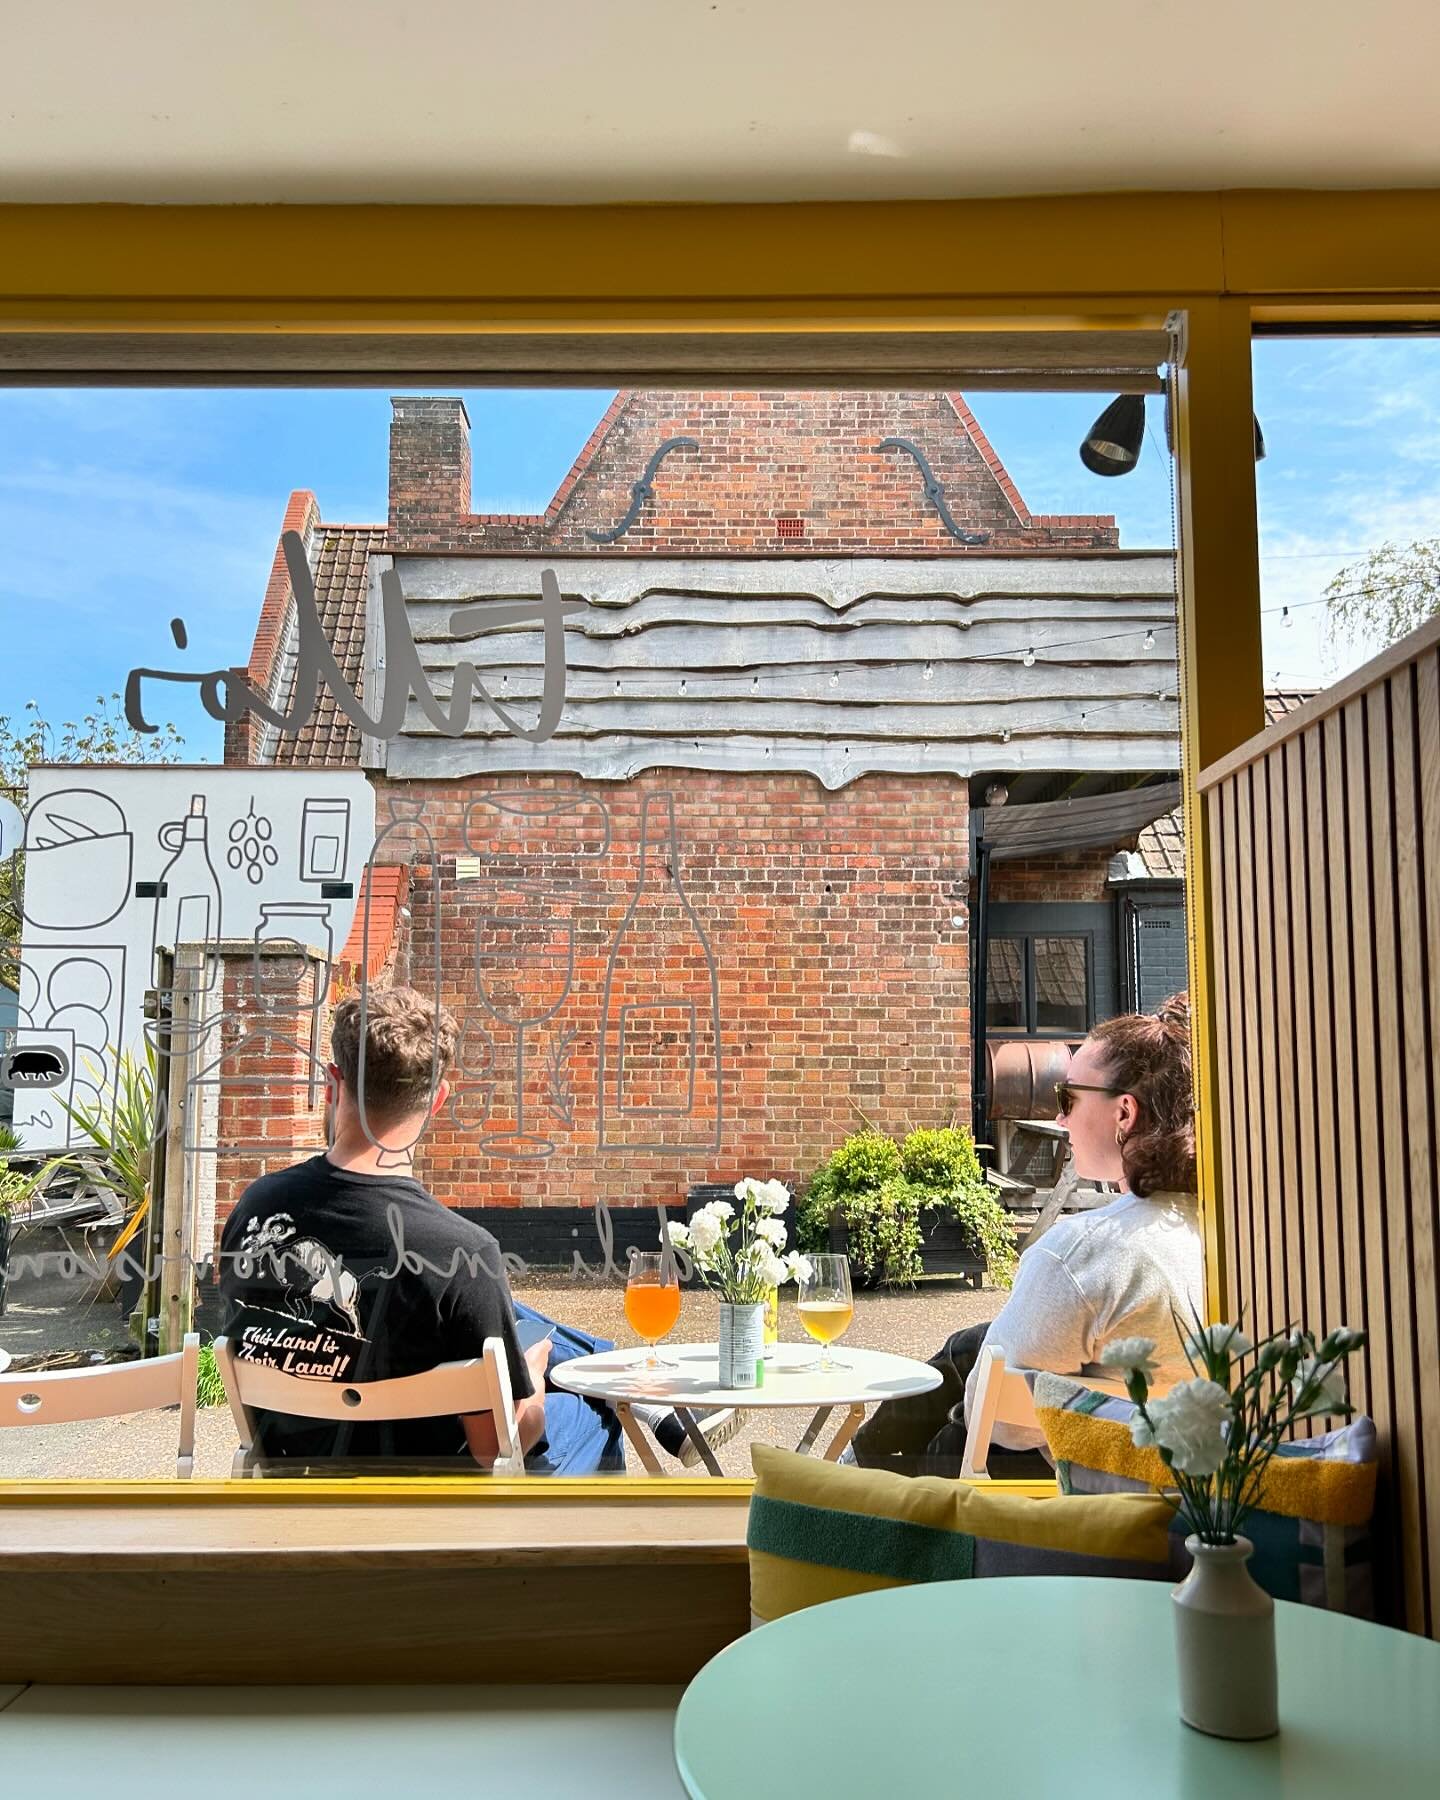 Two absolutely perfect spots to bask in the sun with a coffee or a wine or a beer or a&hellip; you get the idea&hellip;
&bull;
&bull;
&bull;
&bull;
&bull;
#tillos #tillosdeli #oultonbroaddeli #oultonbroad